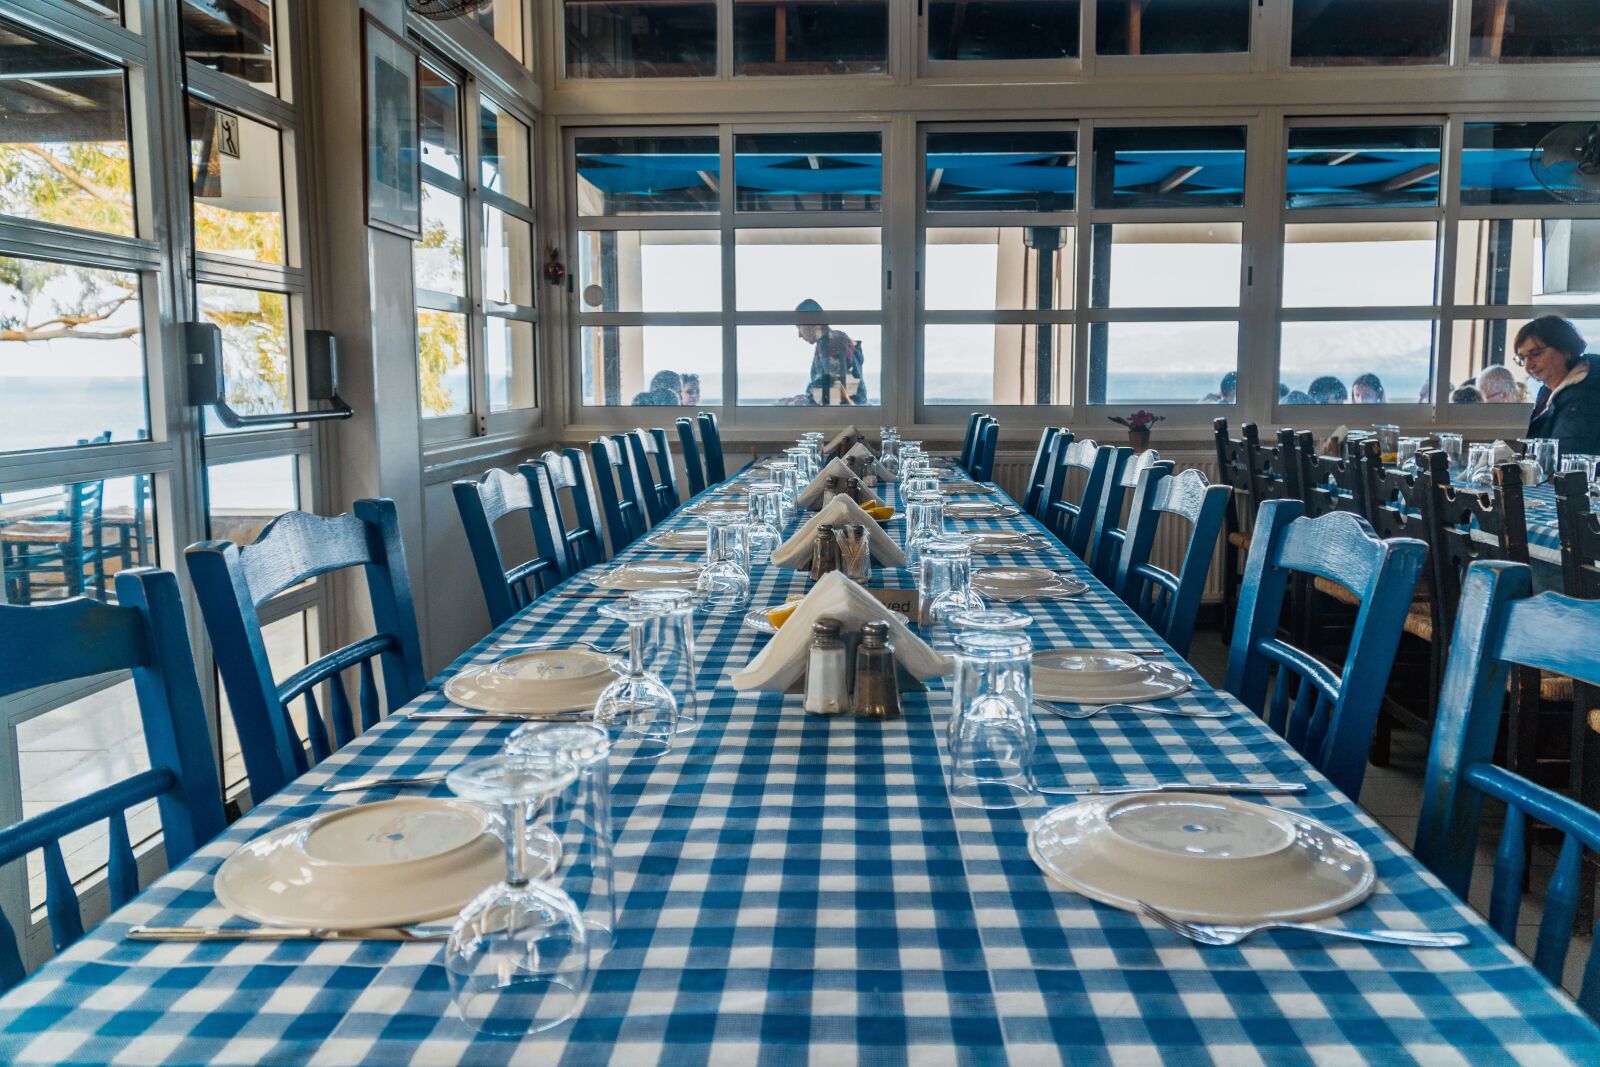 Sony a6500 sample photo. Greek, gedeckter table, tablecloth photography